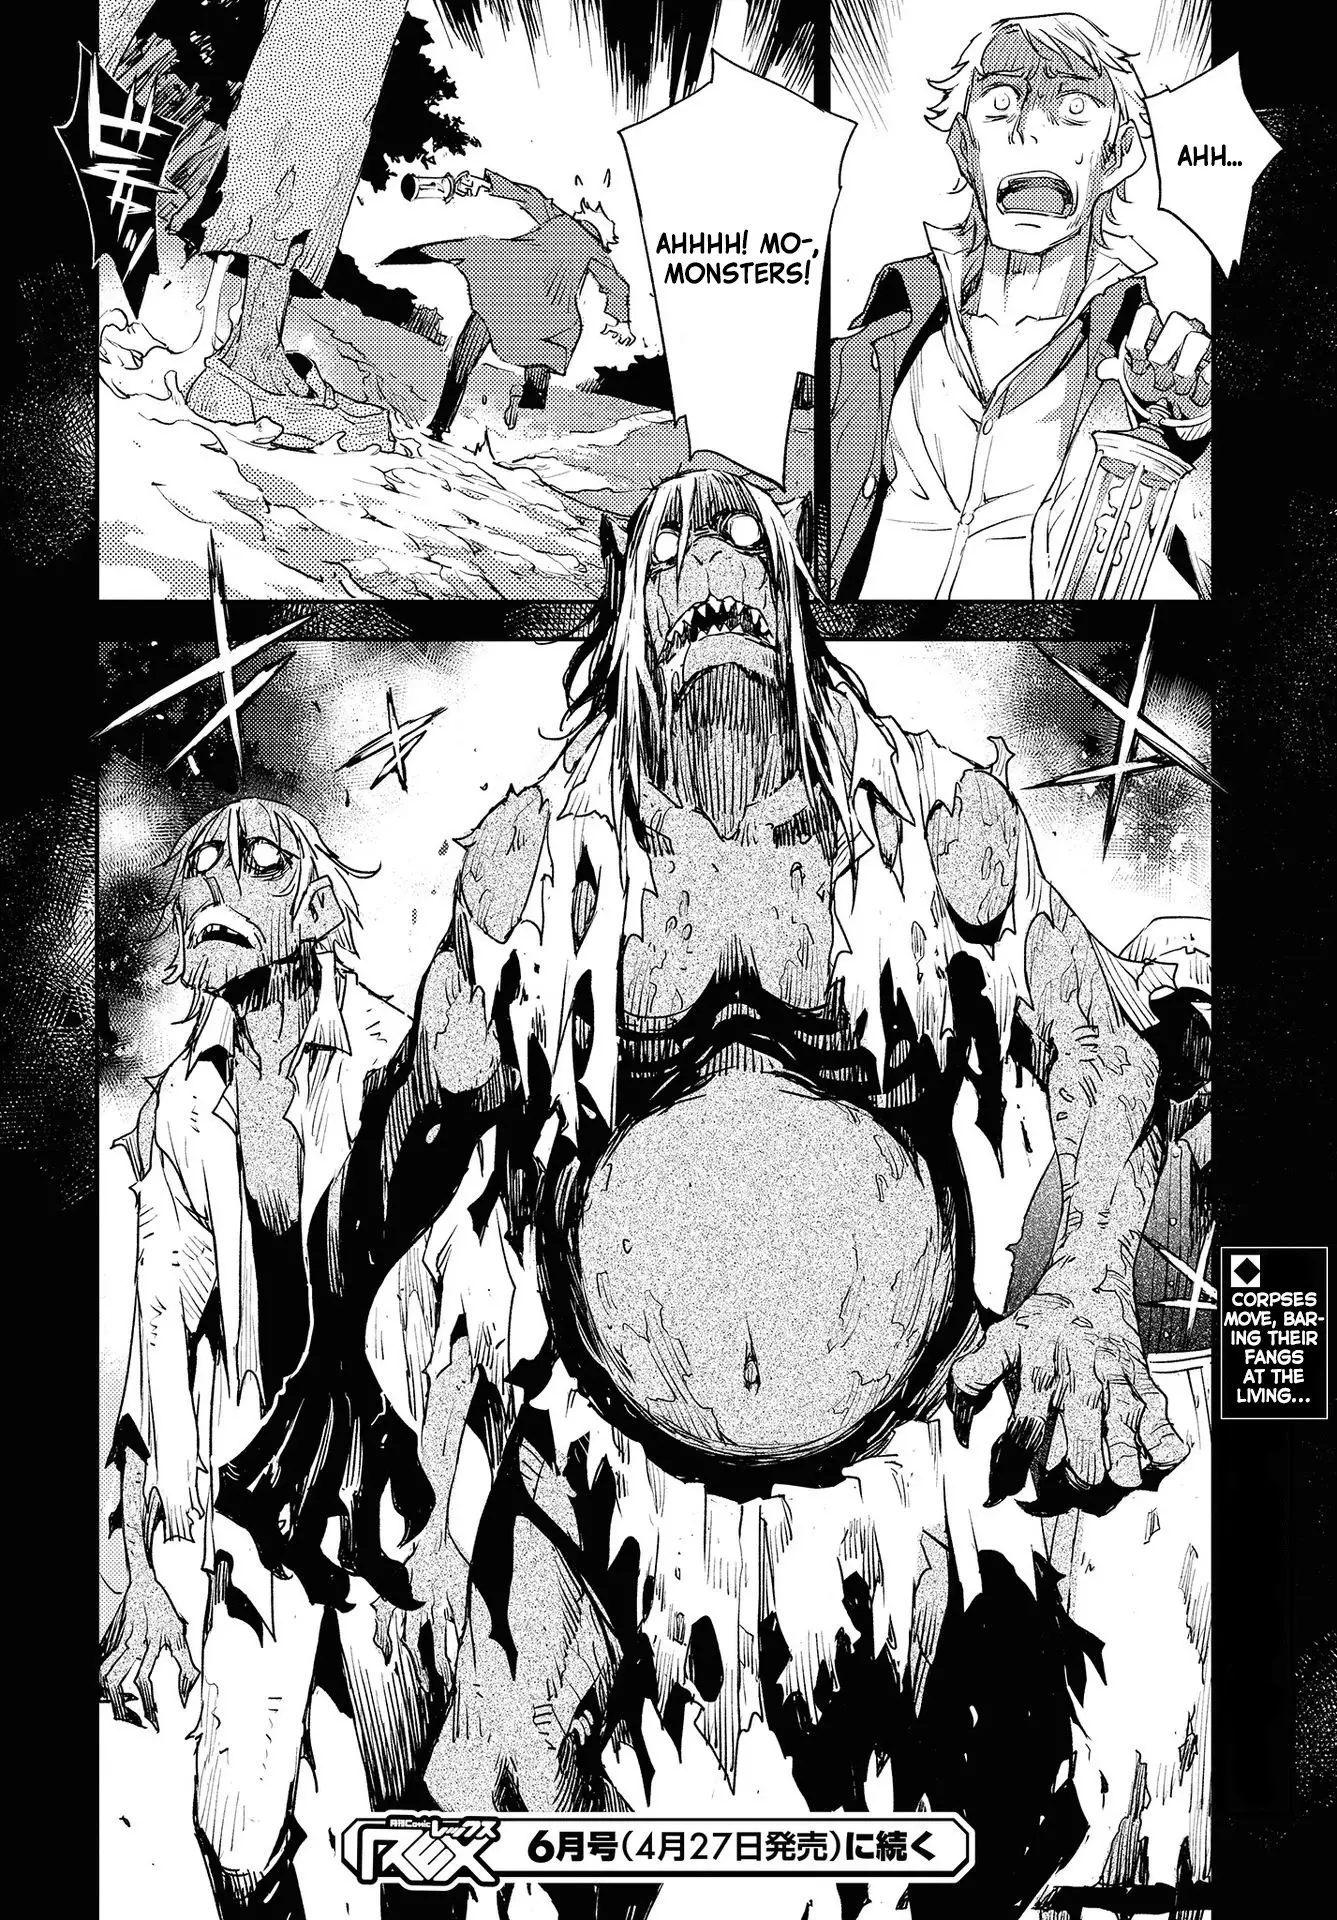 Fate/grand Order: Epic Of Remnant - Subspecies Singularity Iv: Taboo Advent Salem: Salem Of Heresy - 15 page 12